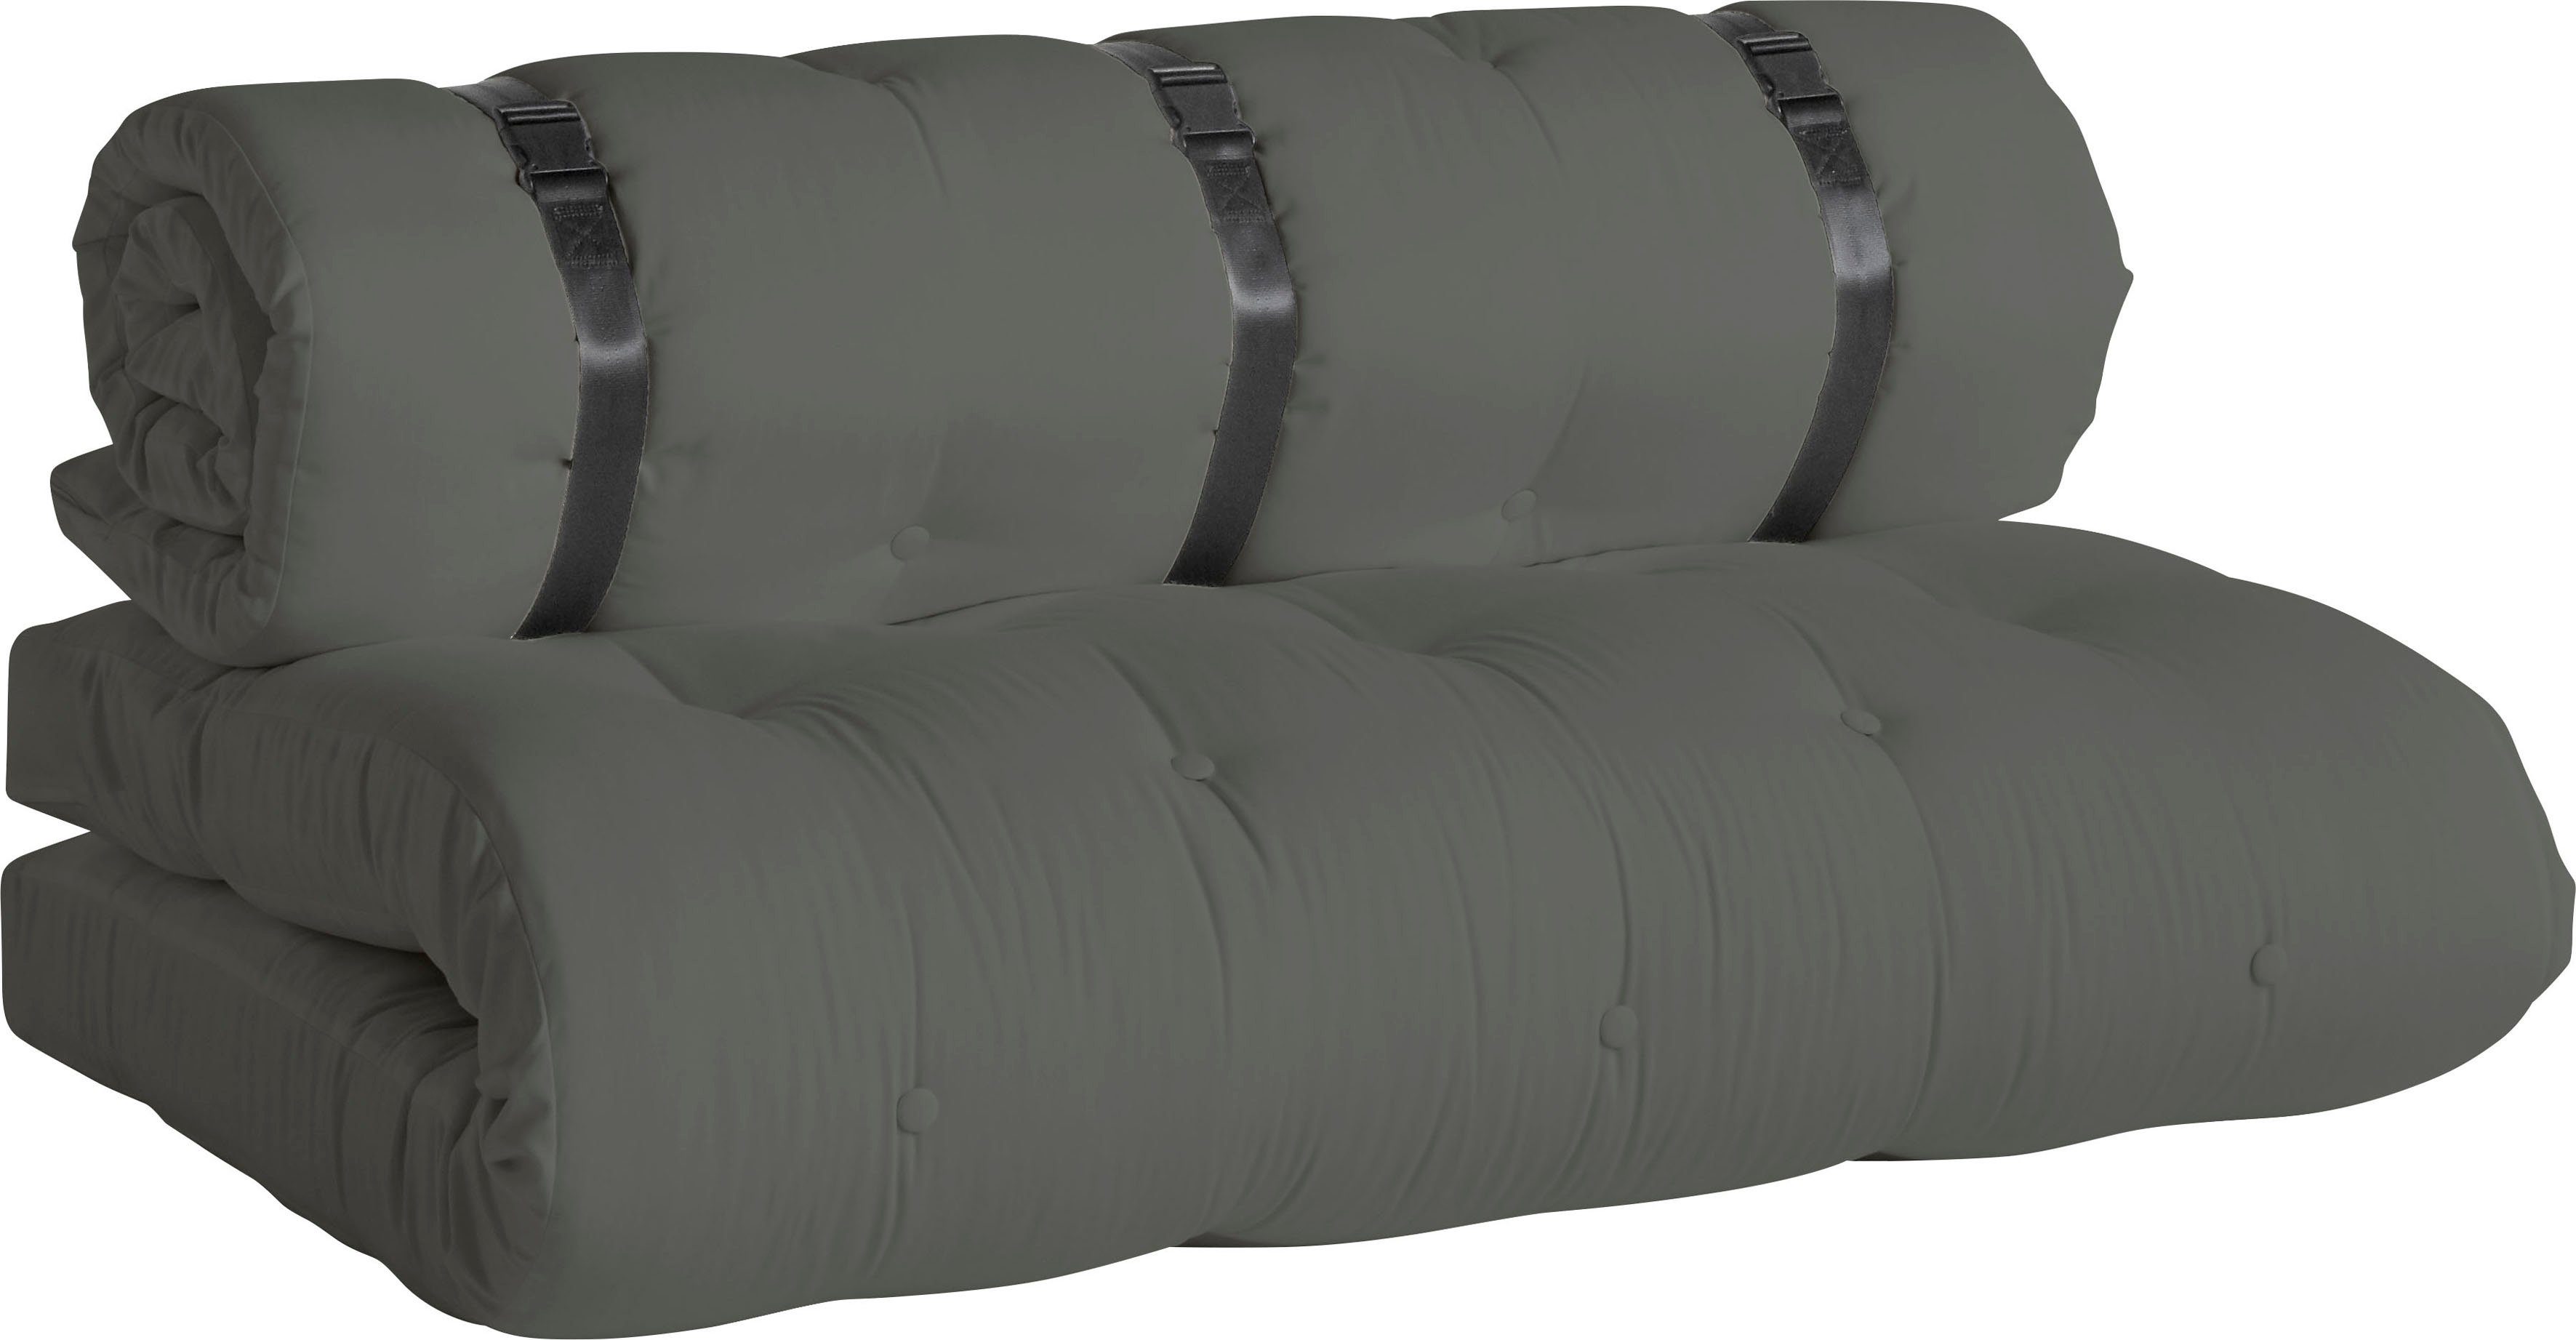 Karup Design Loungesofa Buckle-Up, OUT dunkelgrau | Alle Sofas